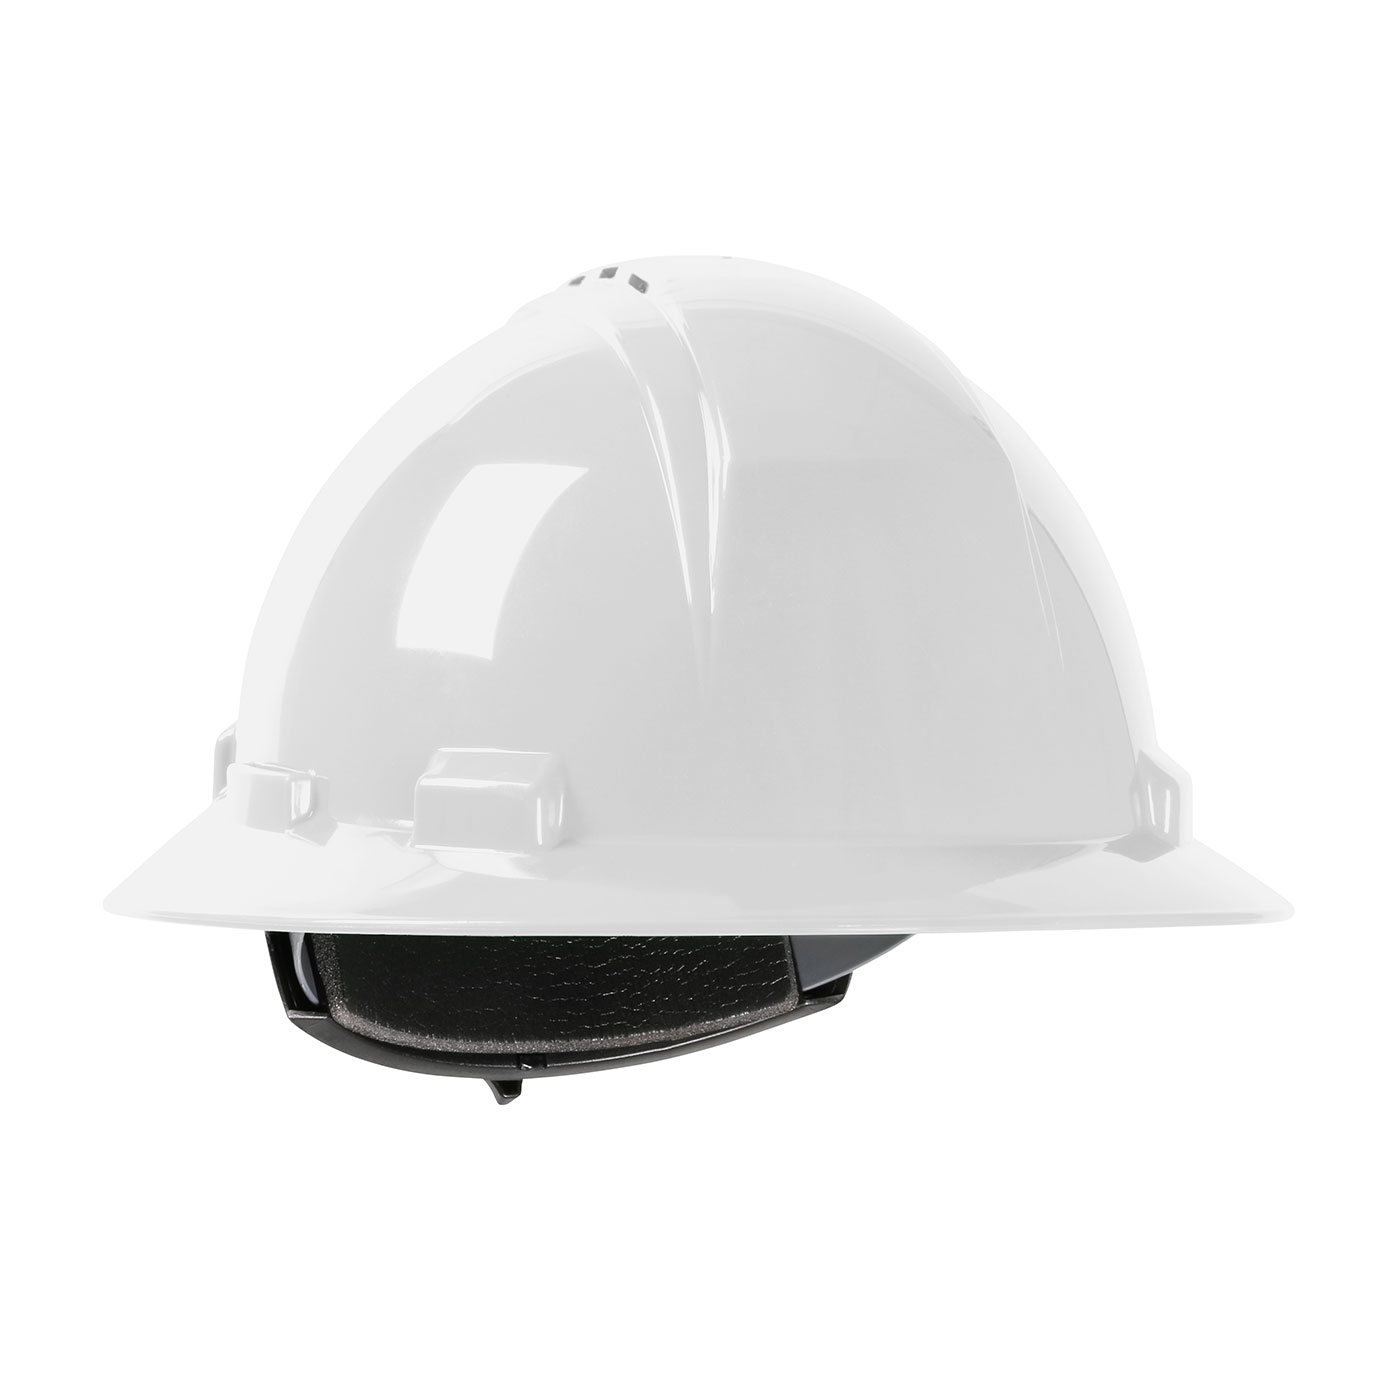 PIP 280-HP641RV Dynamic Kilimanjaro Vented, Ful Brim Hard Hat with HDPE Sheel, 4 Point Textile Suspension and Wheel Ratchet Adjustment, White